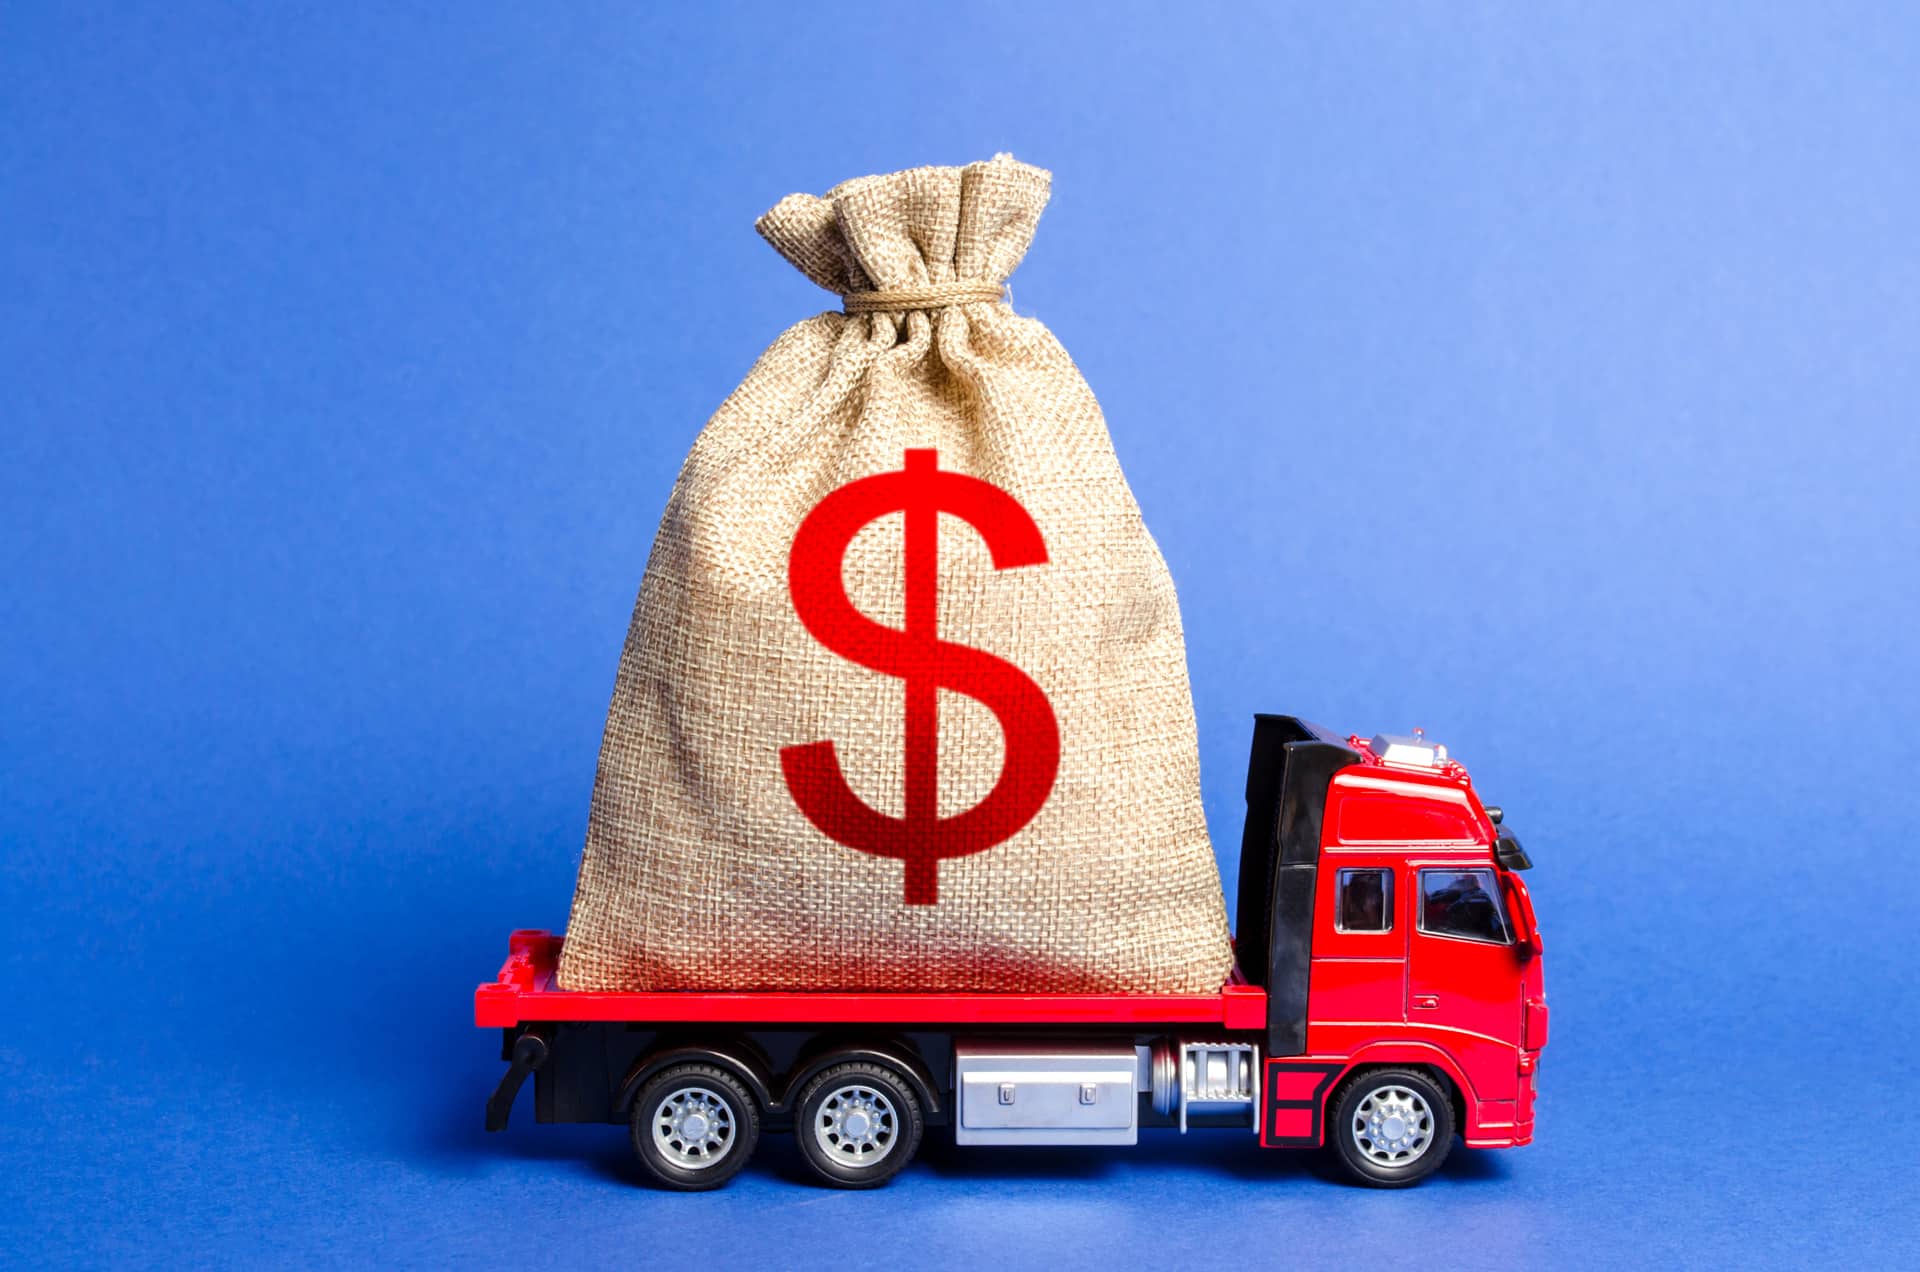 Red truck carries a big bag of money